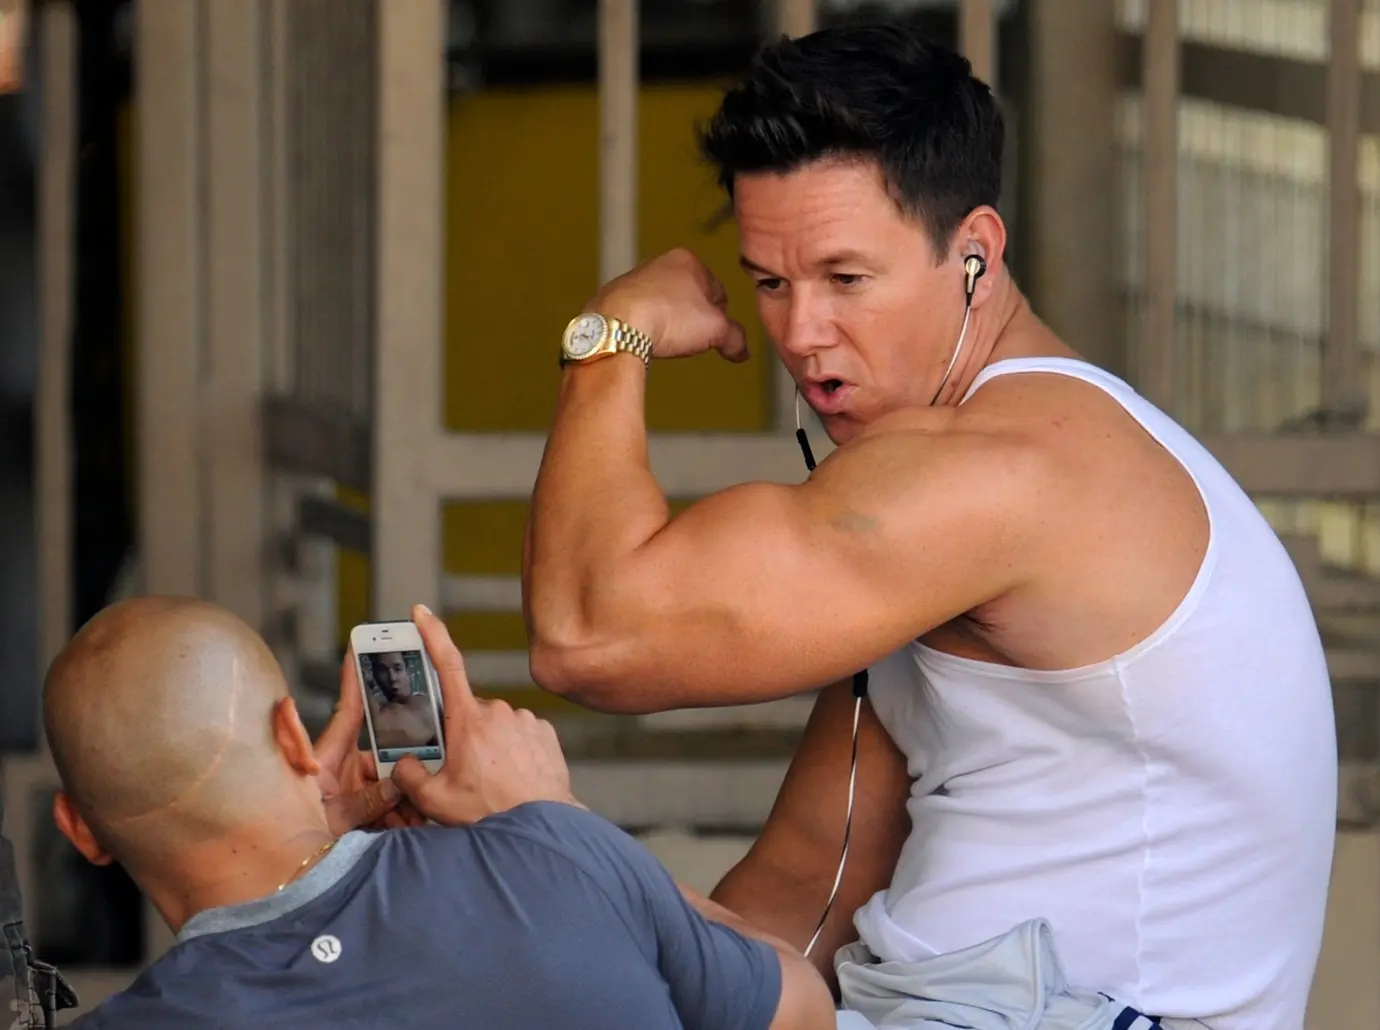 Mark Wahlberg in Pain and Gain